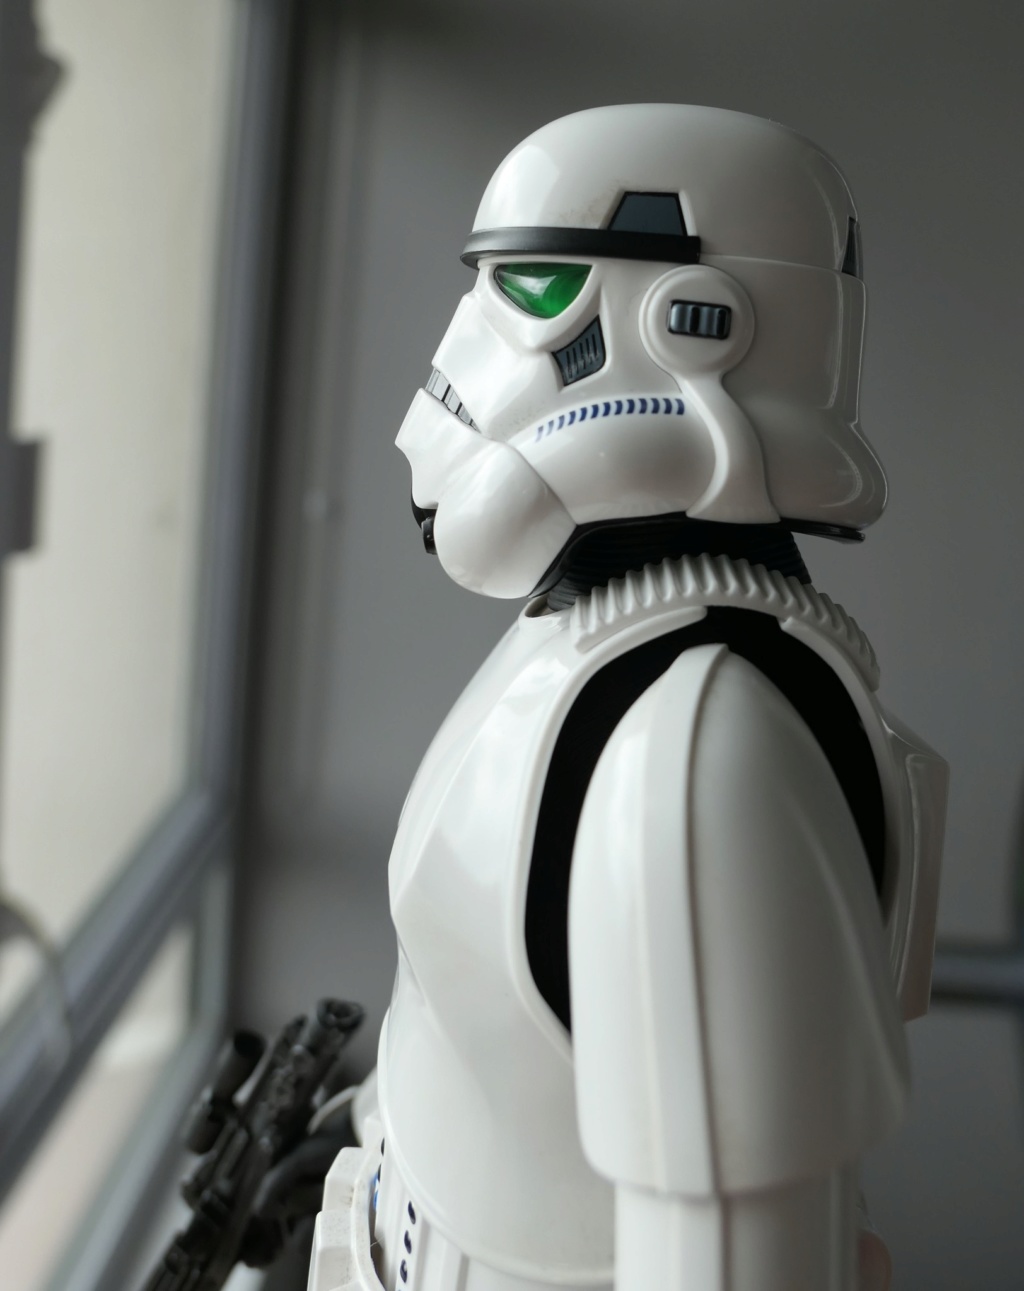 starwars - NEW PRODUCT: HOT TOYS: STAR WARS STORMTROOPER (DELUXE VERSION) 1/6TH SCALE COLLECTIBLE FIGURE 2h6slc10